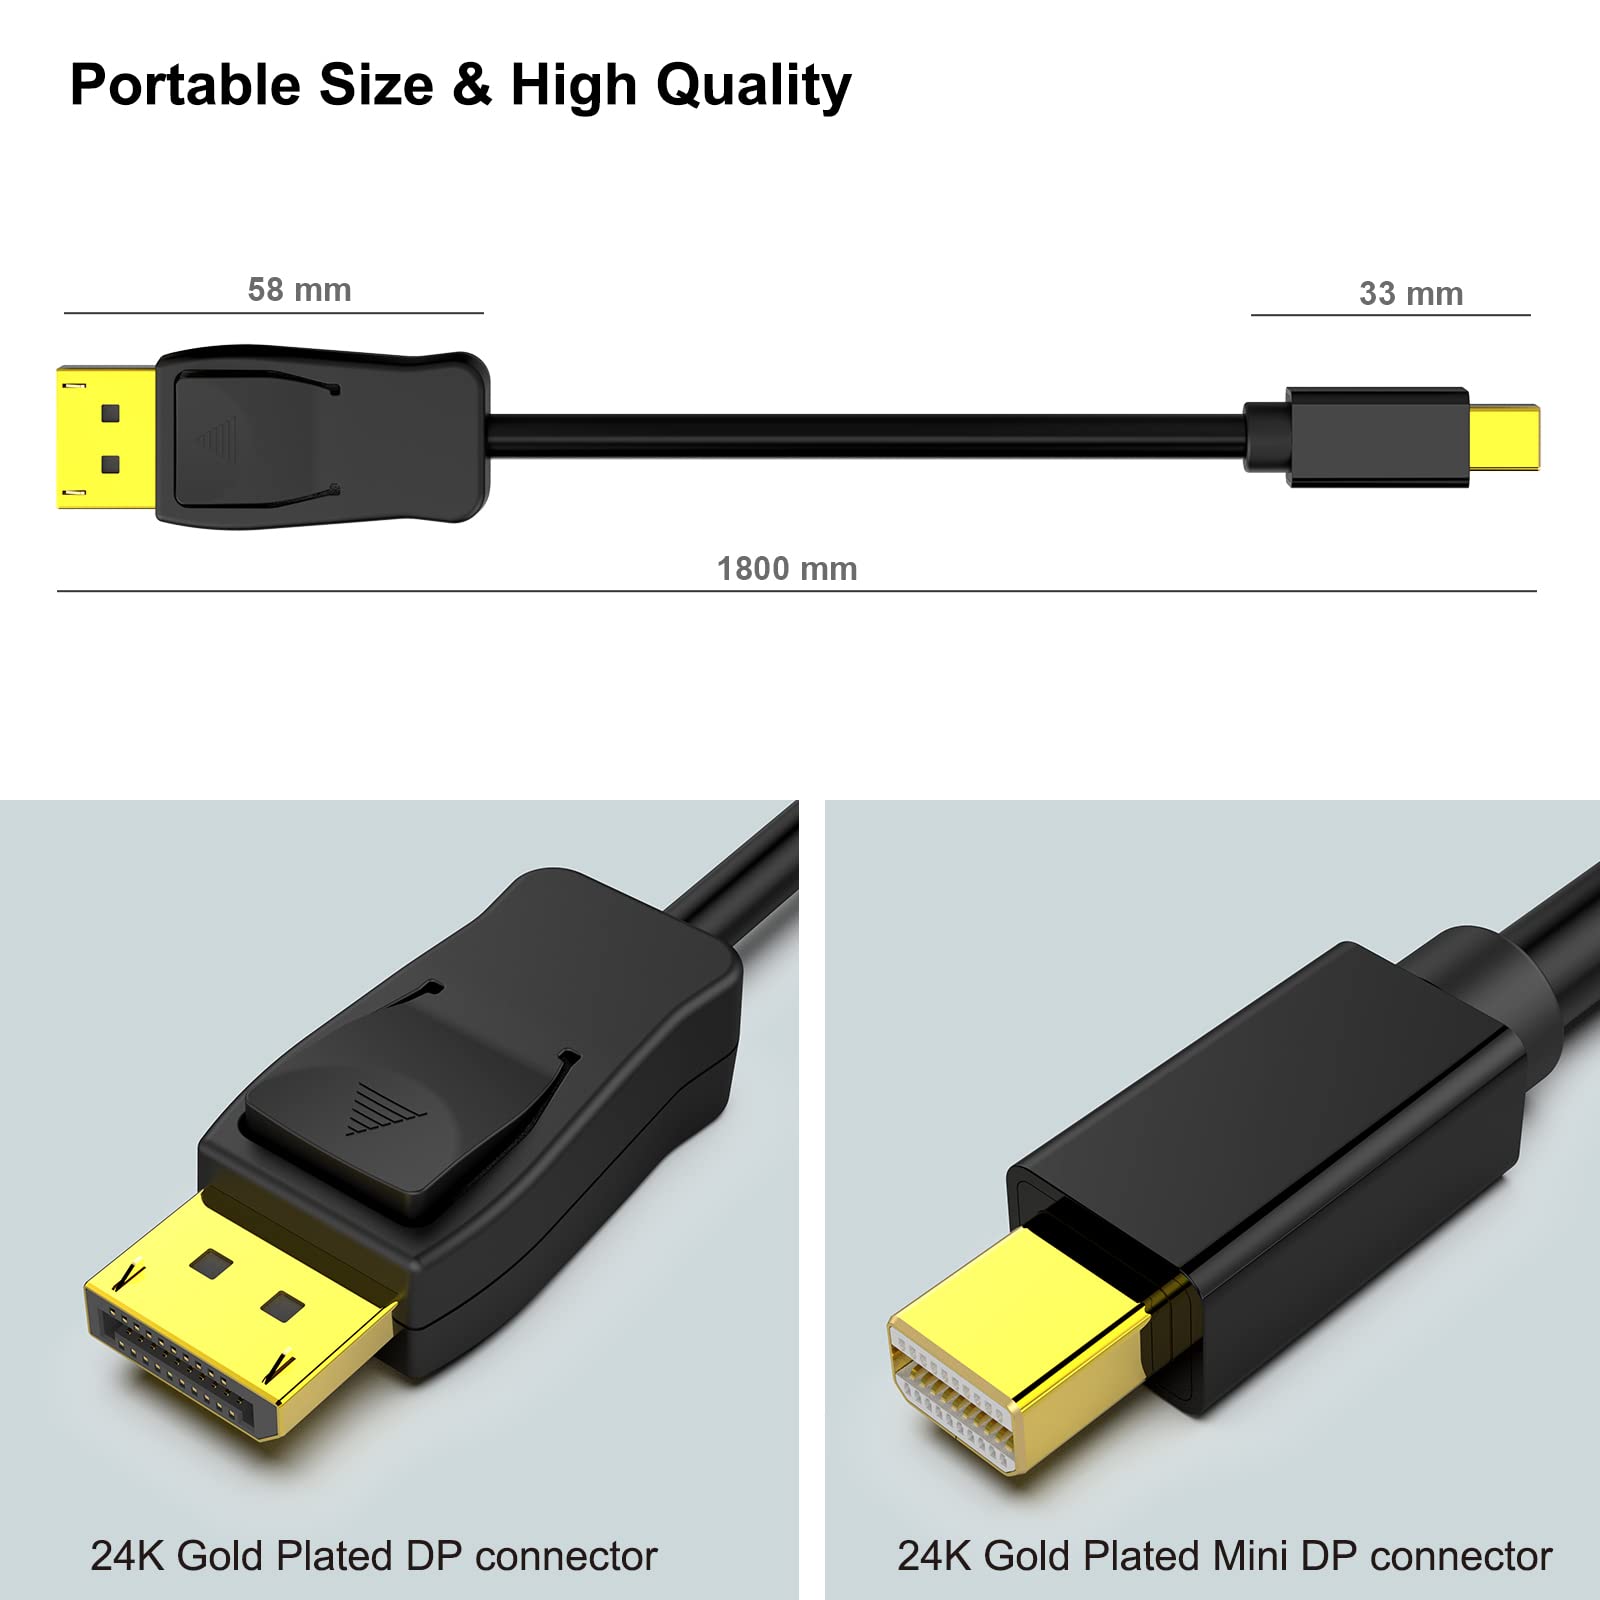 BENFEI 5 Pack Mini DisplayPort to DisplayPort 6 Feet Cable 4K@60Hz 2K@144Hz, Mini DP(Thunderbolt Compatible) to DP Cable (Male to Male) Gold-Plated Cord